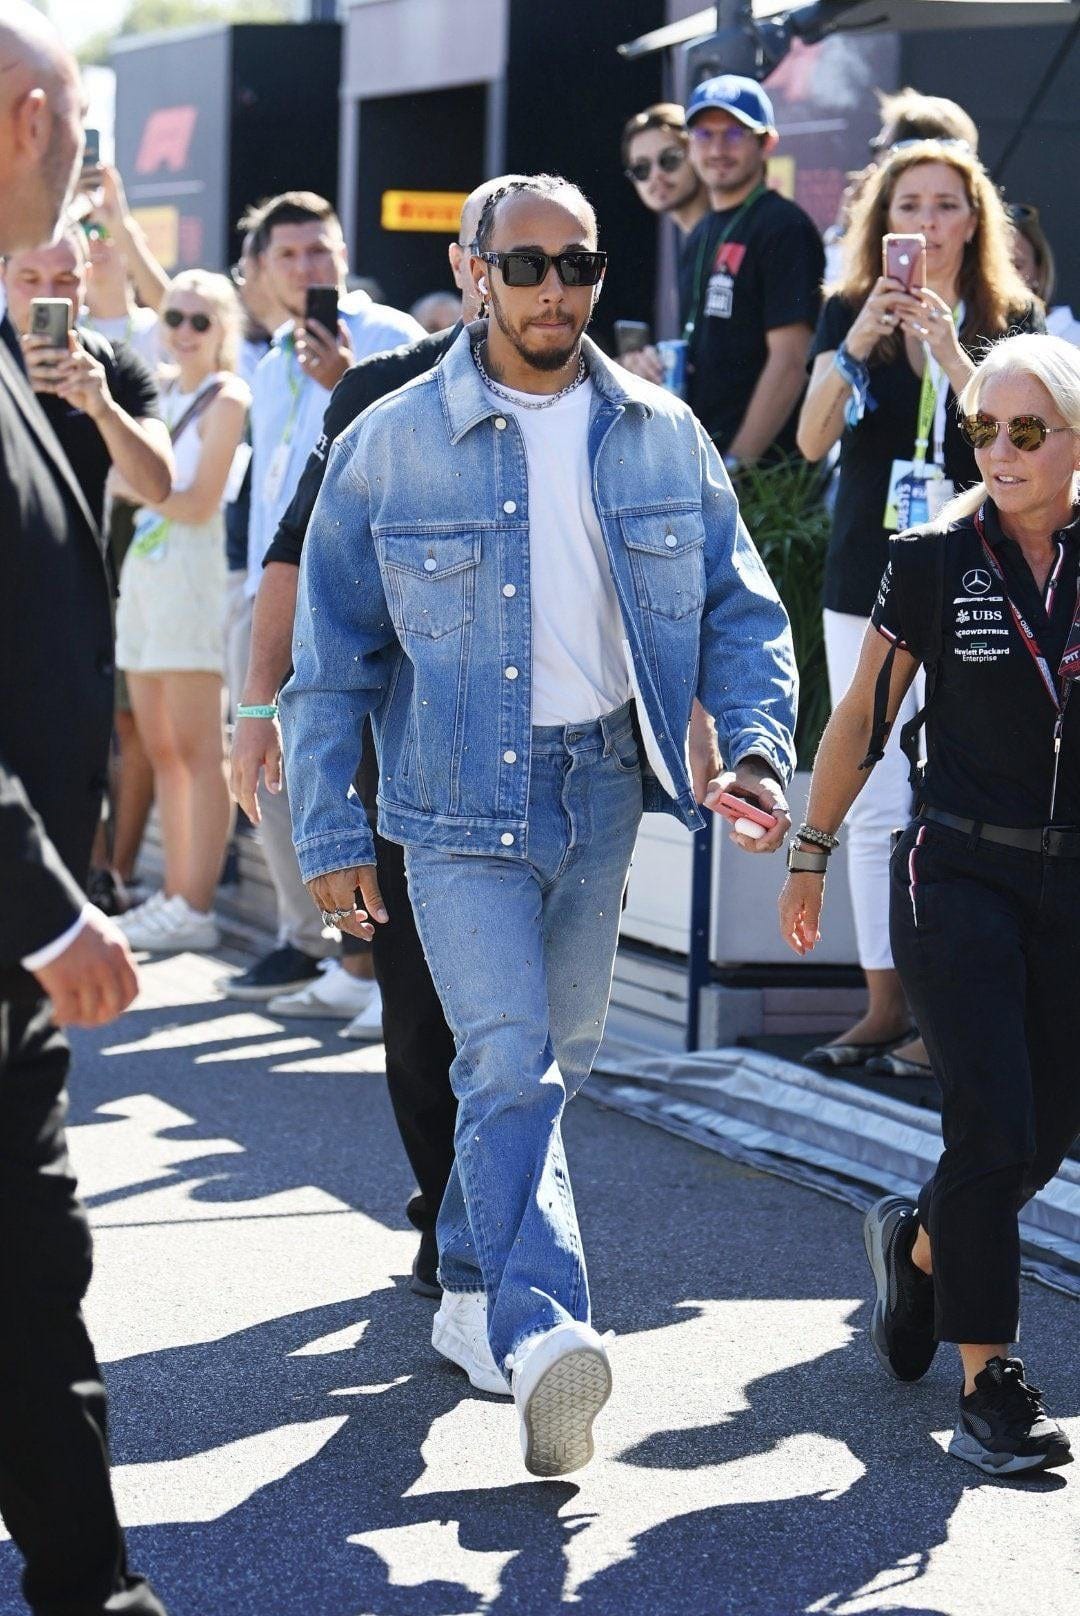 Double denim Lewis arriving at the track today : r/formula1